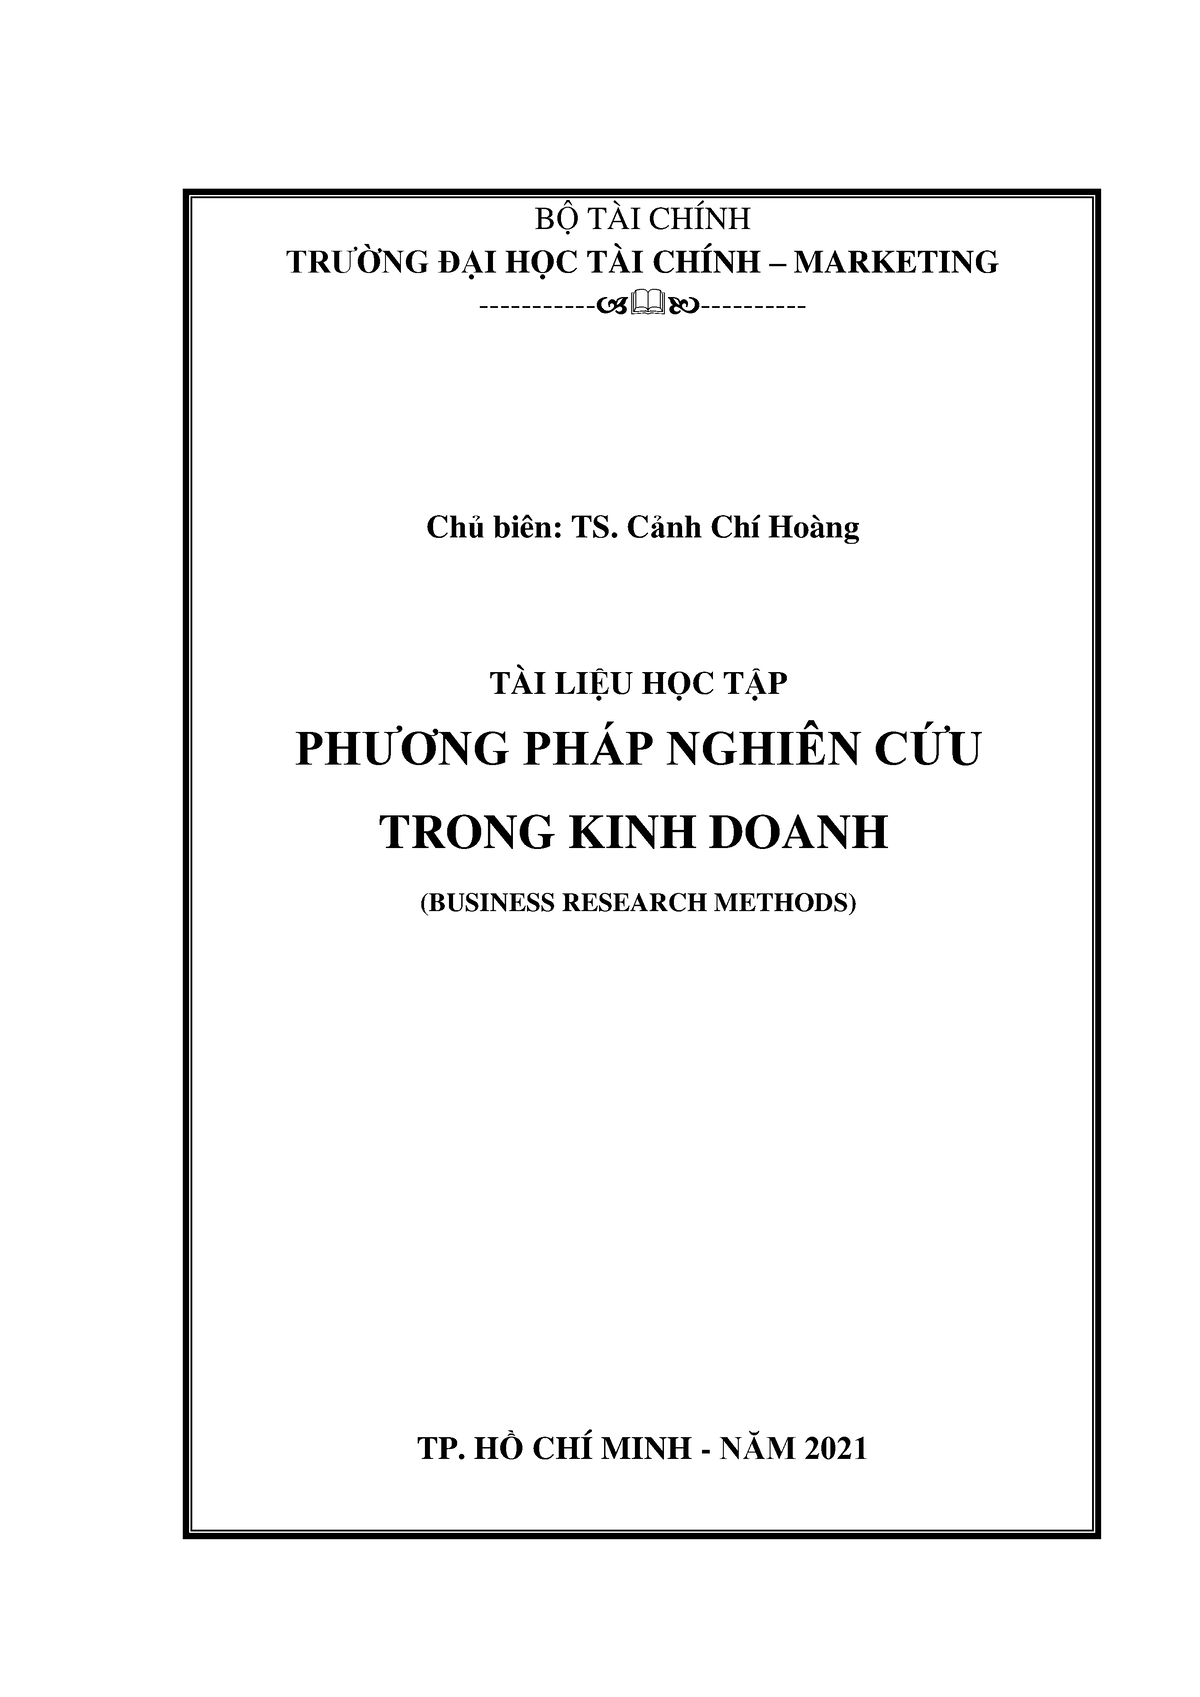 What are some Vietnamese publications on research methods in business?